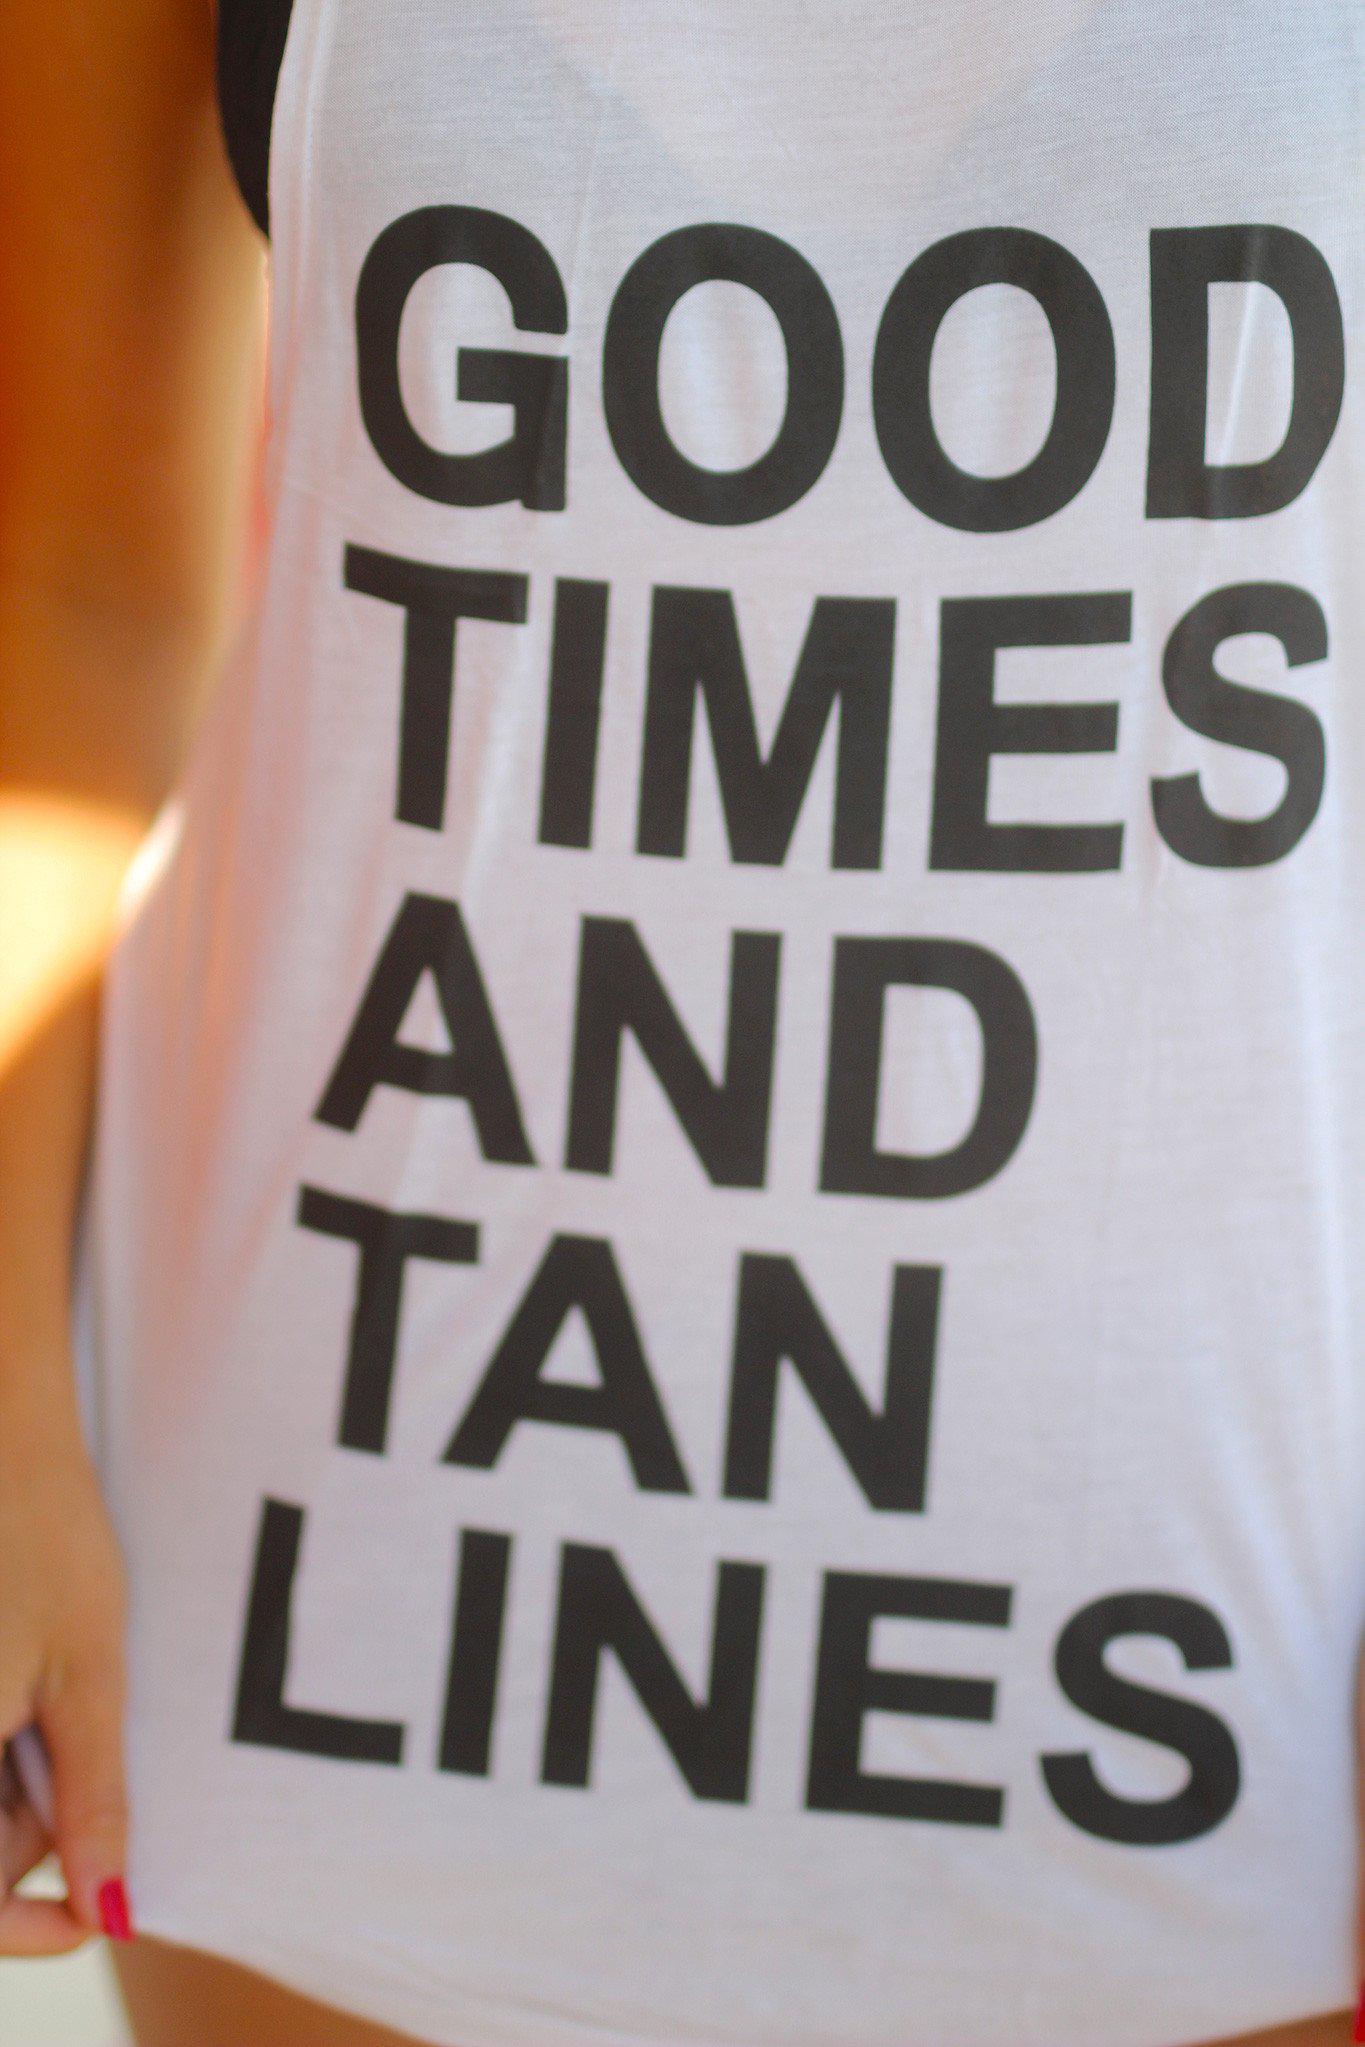 "Good Times and Tan Lines" White Tank Top